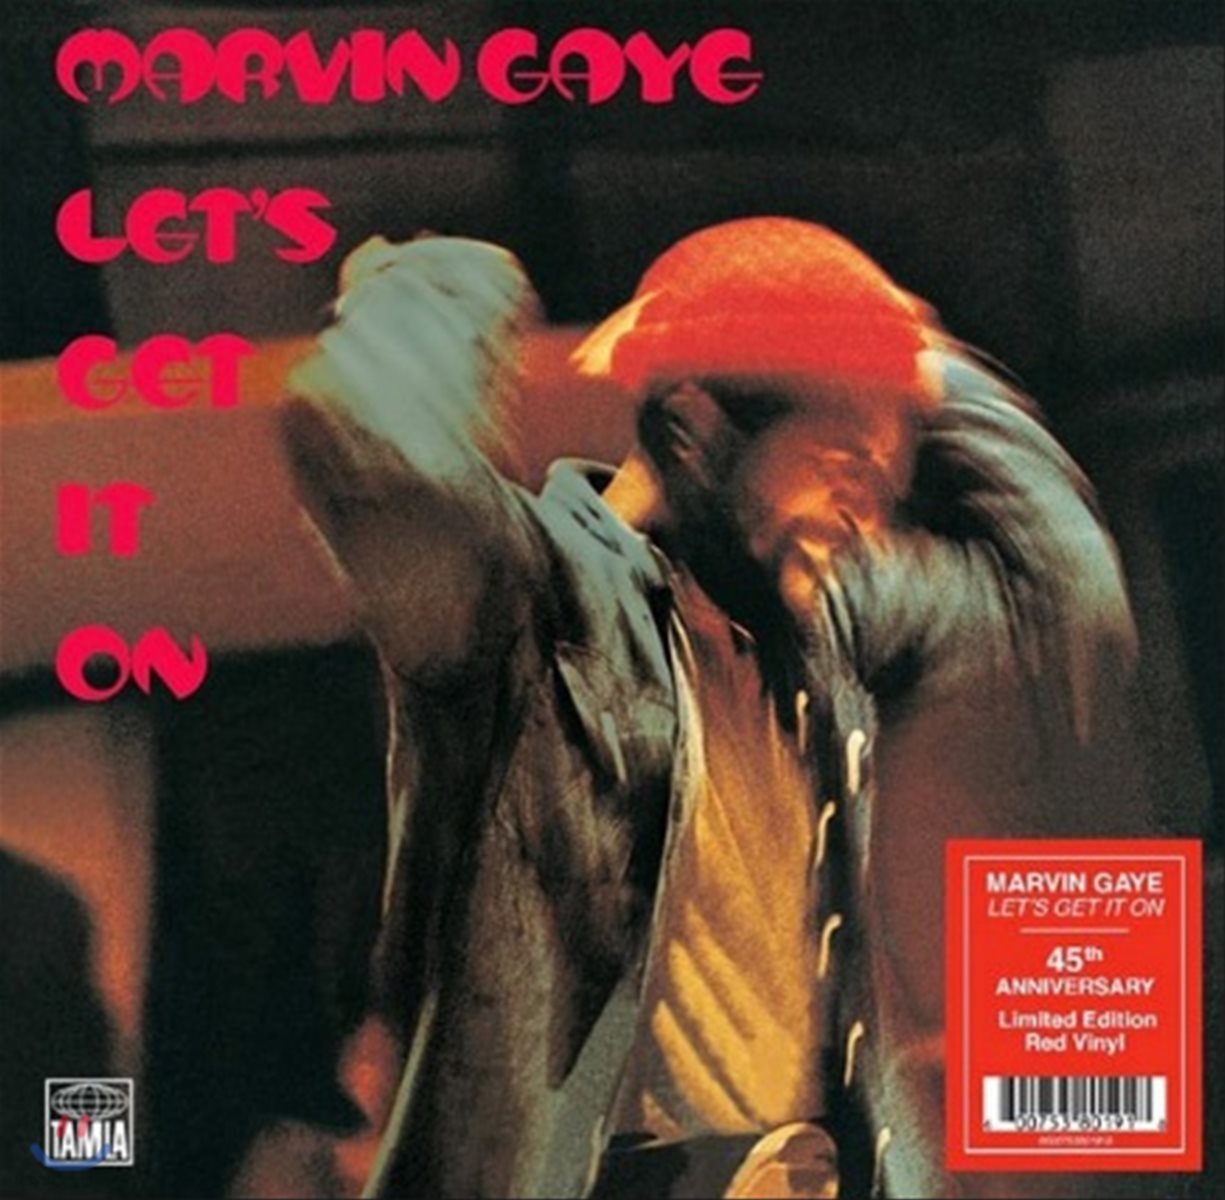 Marvin Gaye (마빈 게이) - Let's Get It on (45th Anniversary Edition) [레드 컬러 LP]